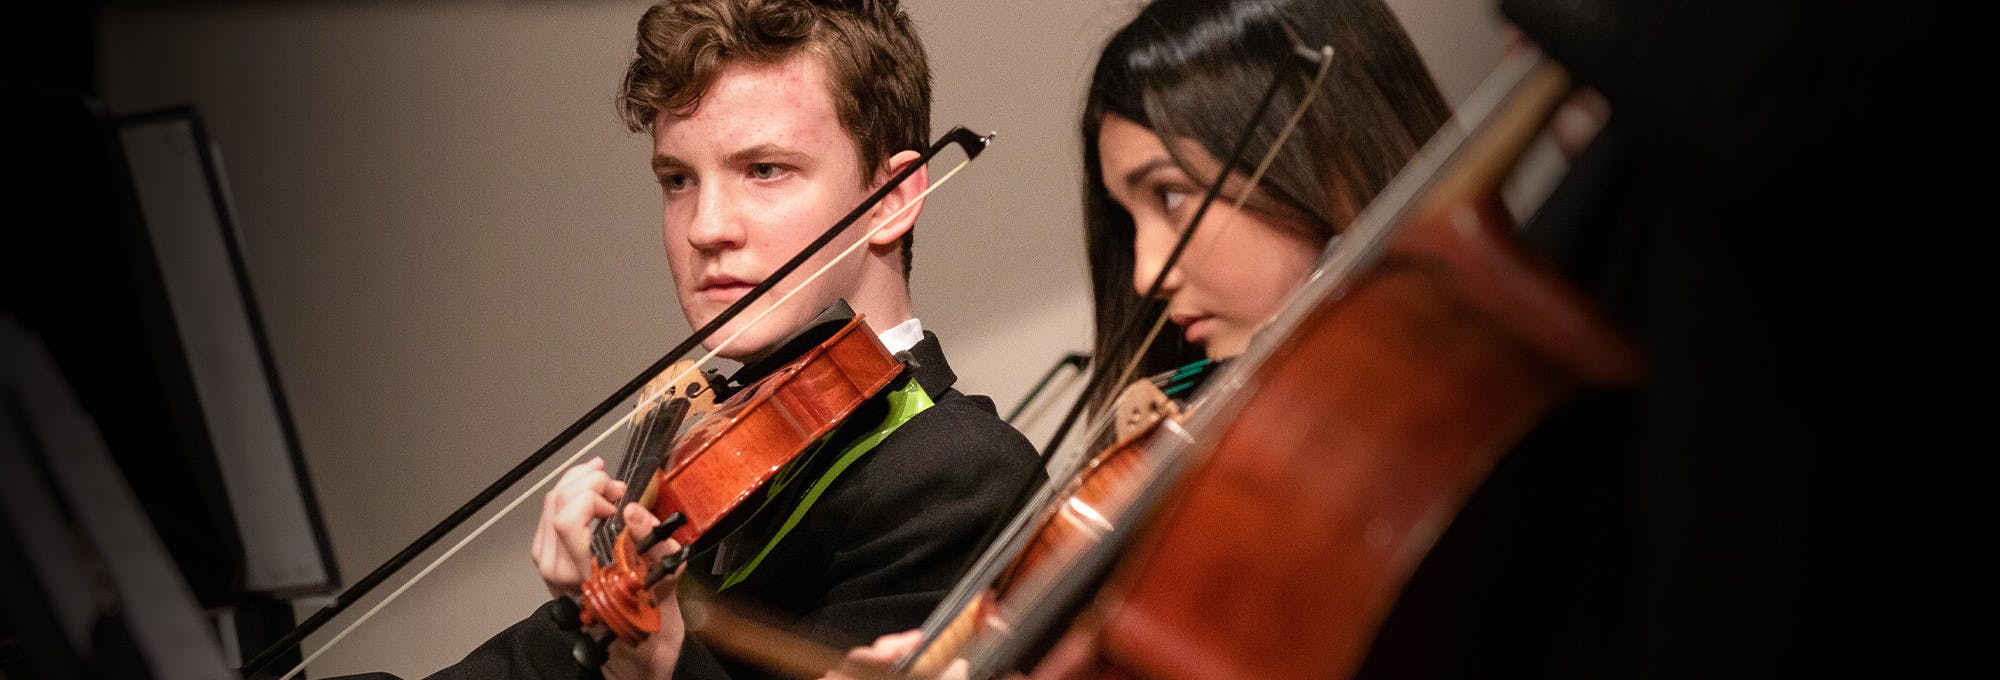  3 young adults playing strings for a symphony which helps represent musical intelligence